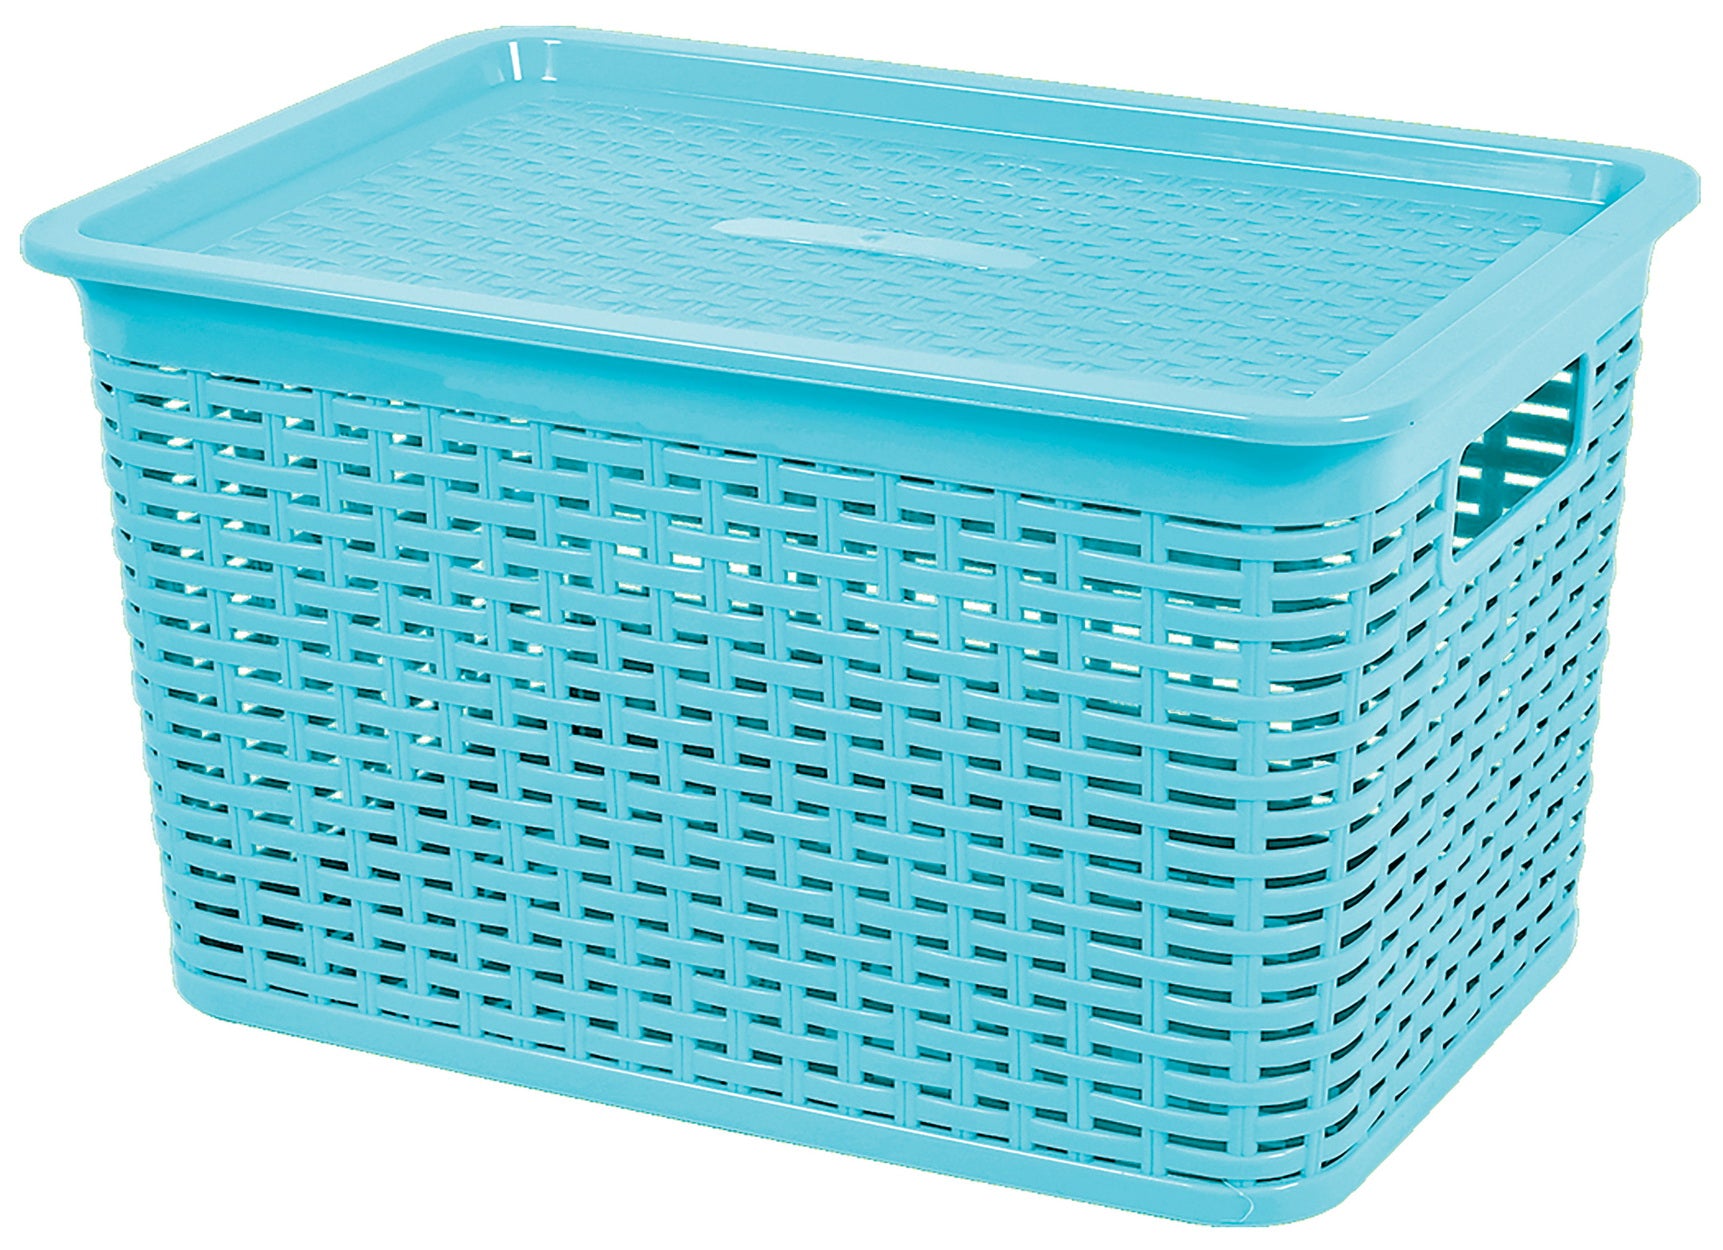 3120 MSCshoping Basket with Lid - Made to order